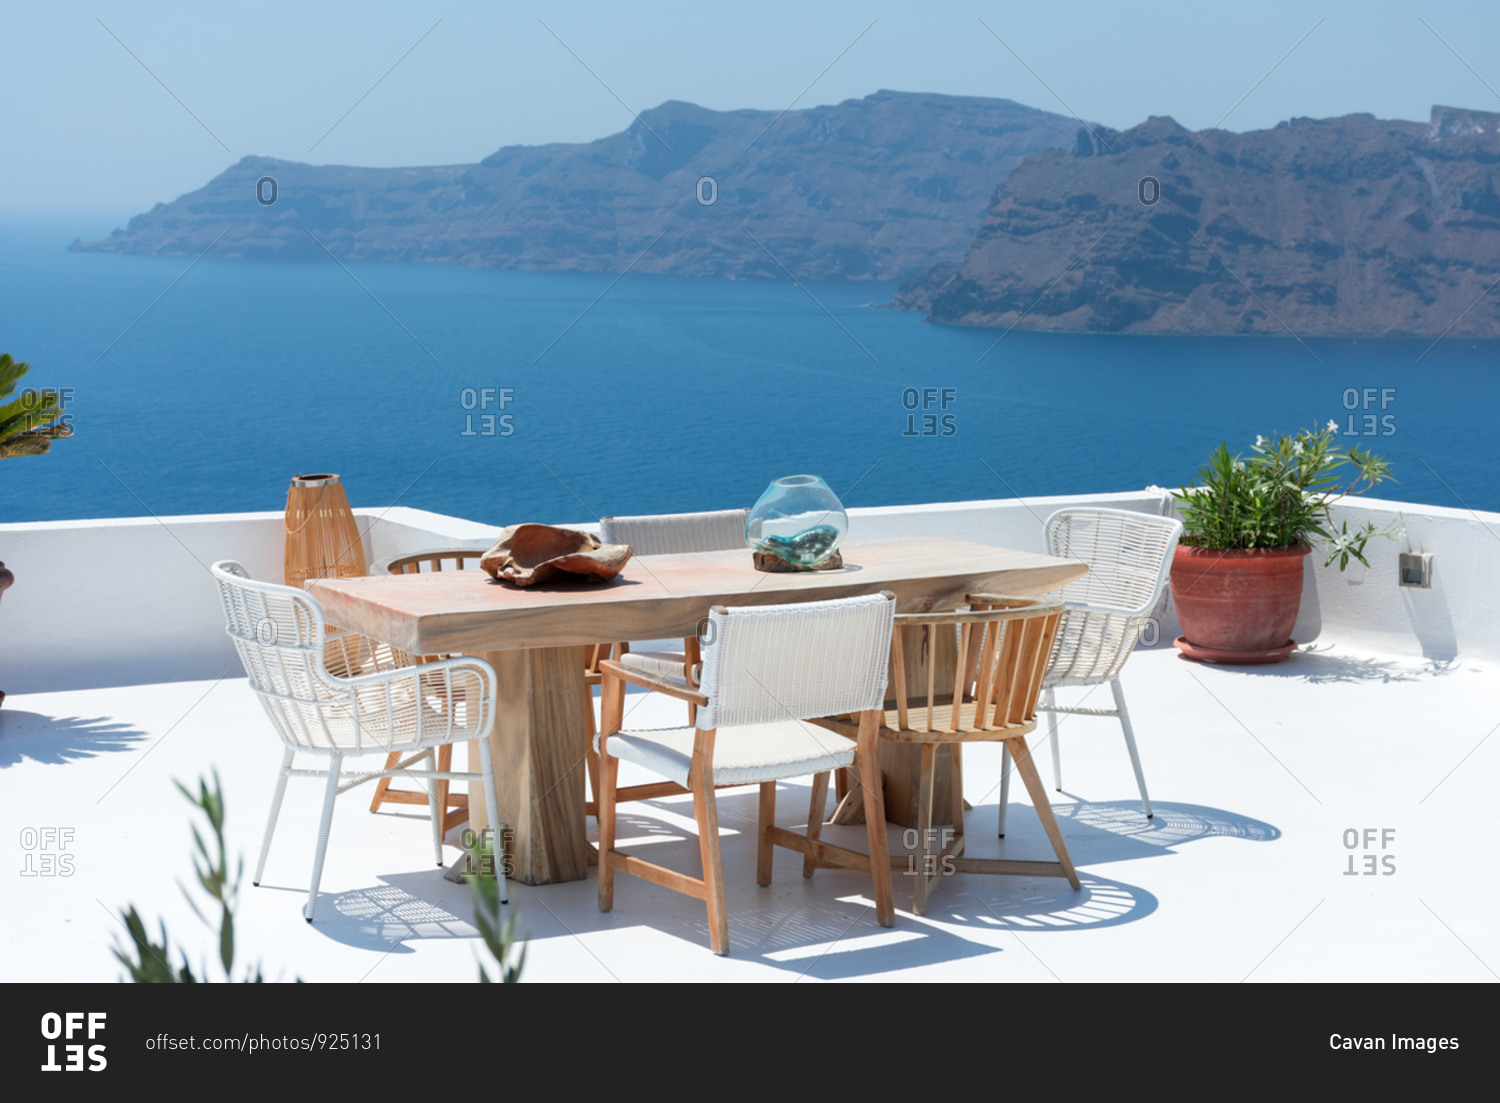 furniture composed by a table and some chairs on a white terrace of a house in Santorini Greece where you can enjoy meal while seeing a romantic seascape to the blue Aegean sea. Horizontal ph